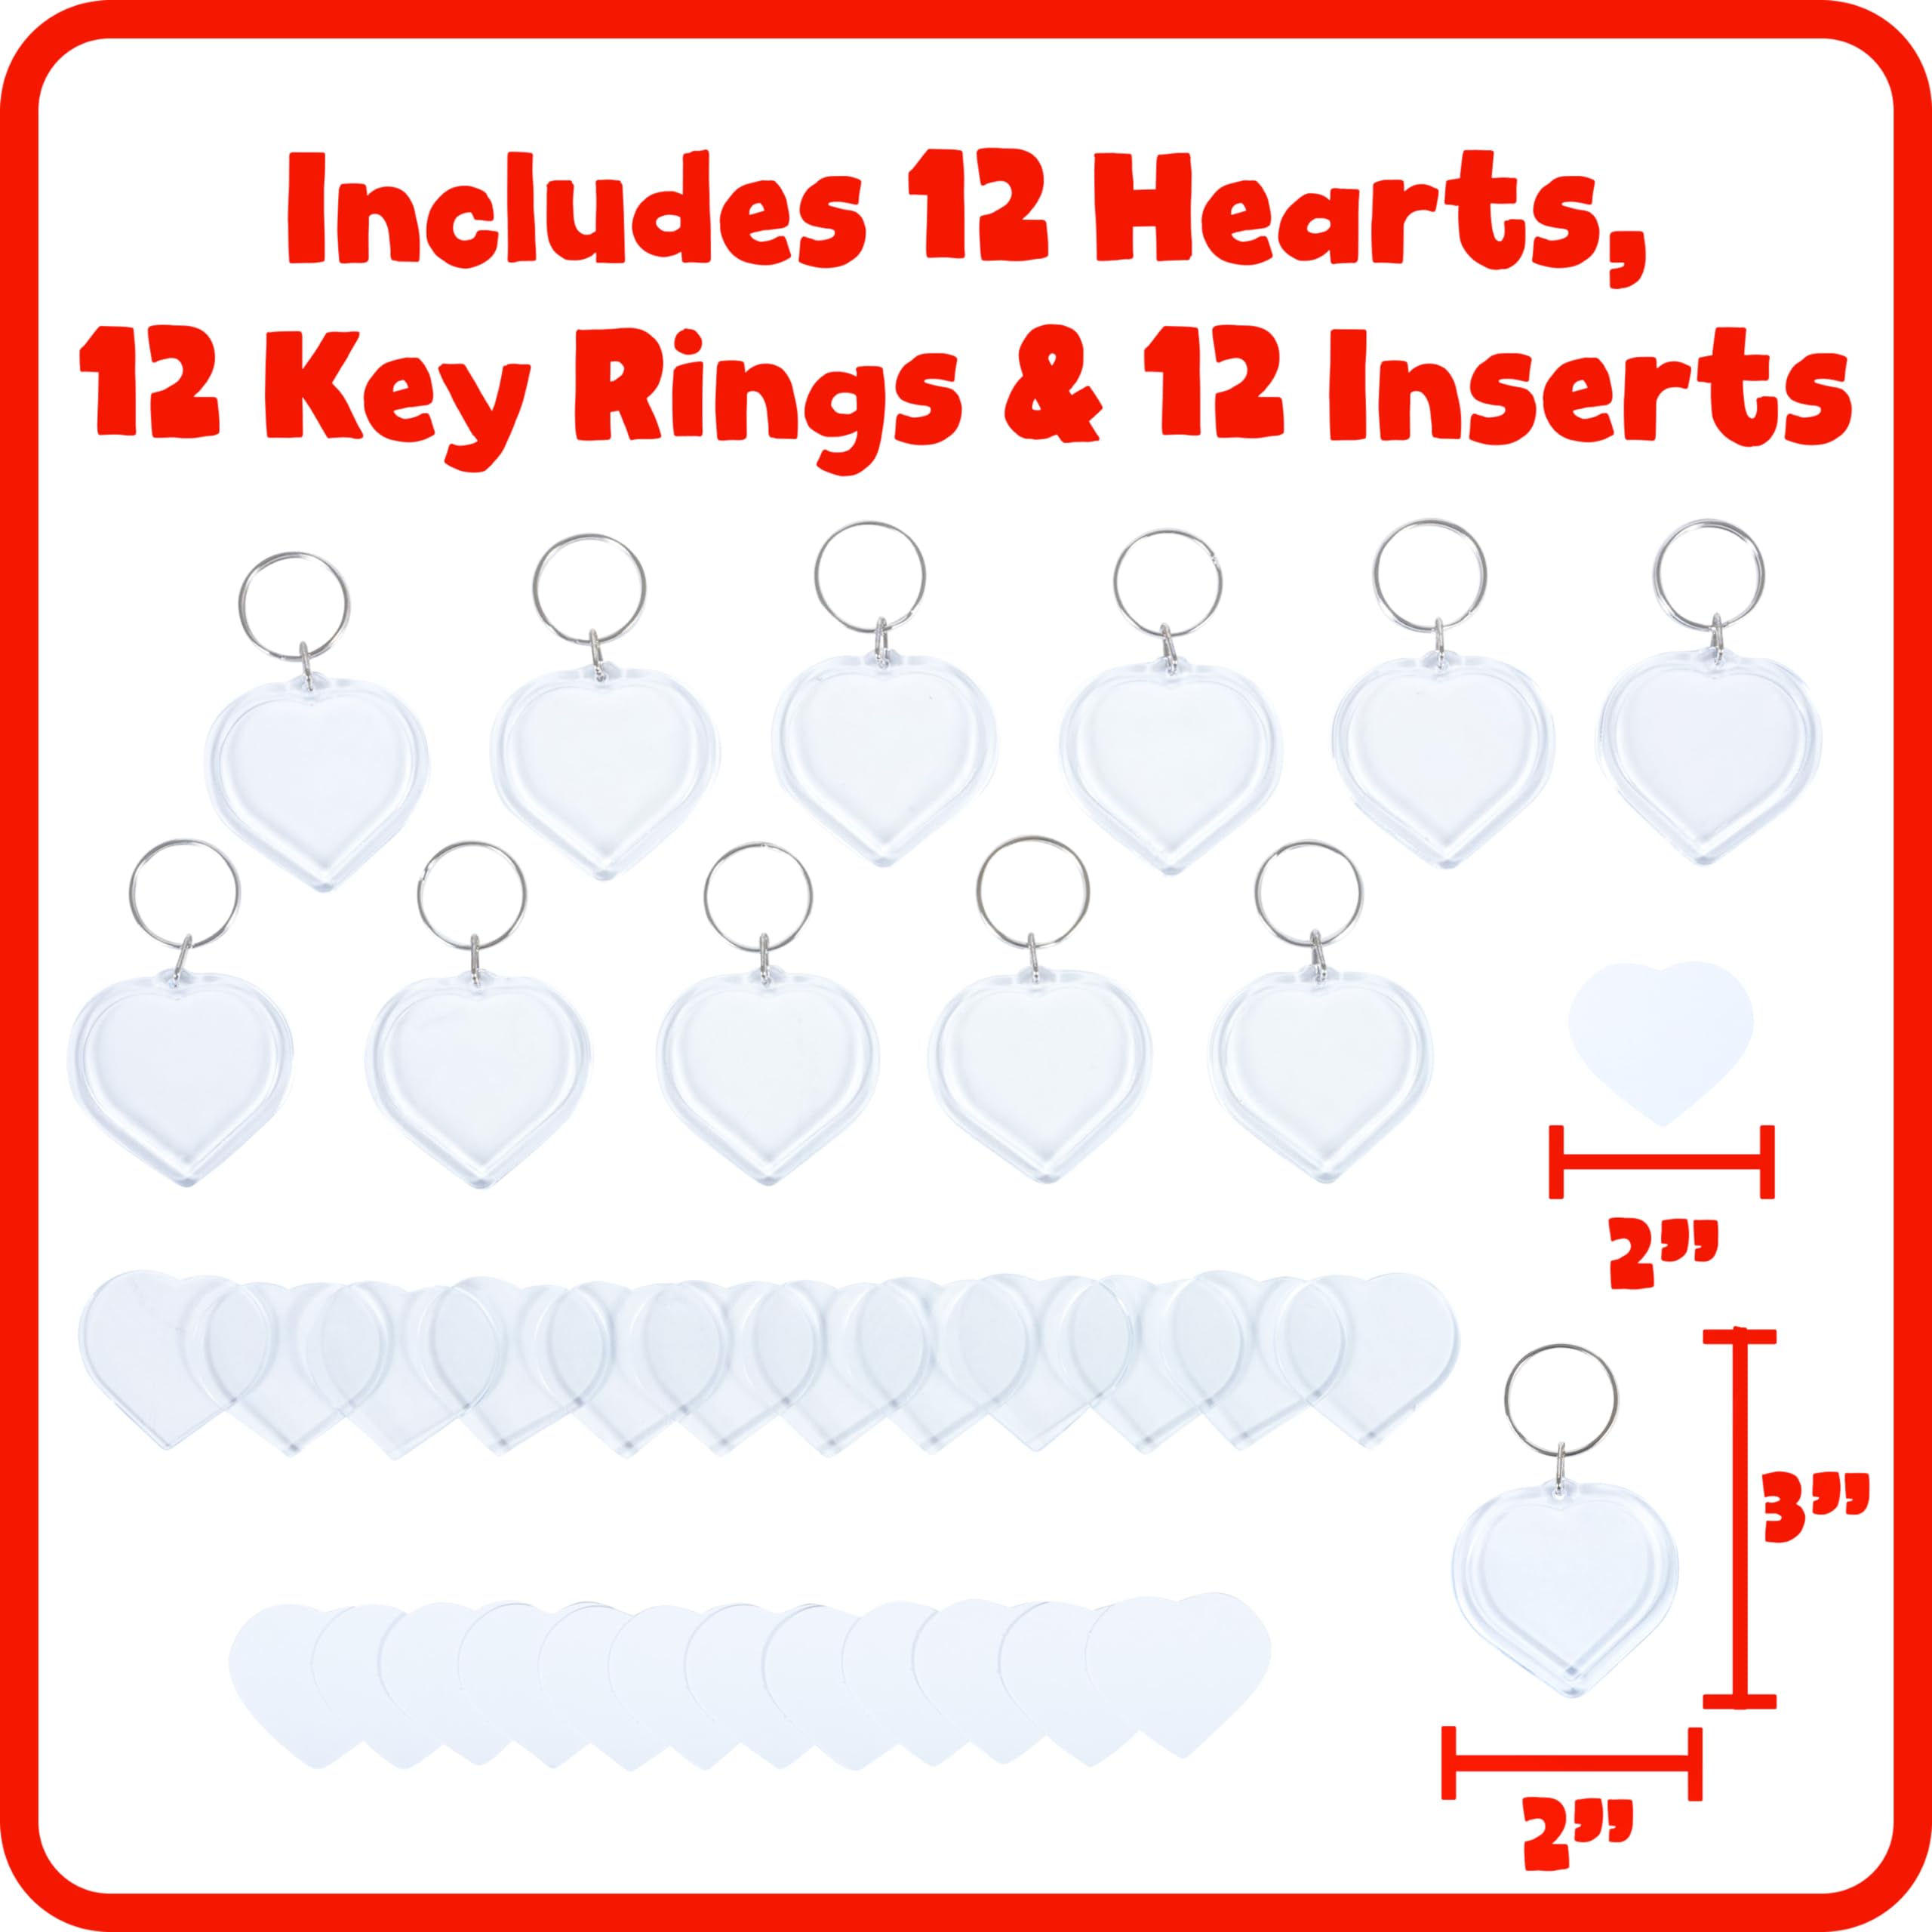 READY 2 LEARN Heart Key Rings - Set of 12 - Valentines Day Gifts for Kids - Classroom Favors